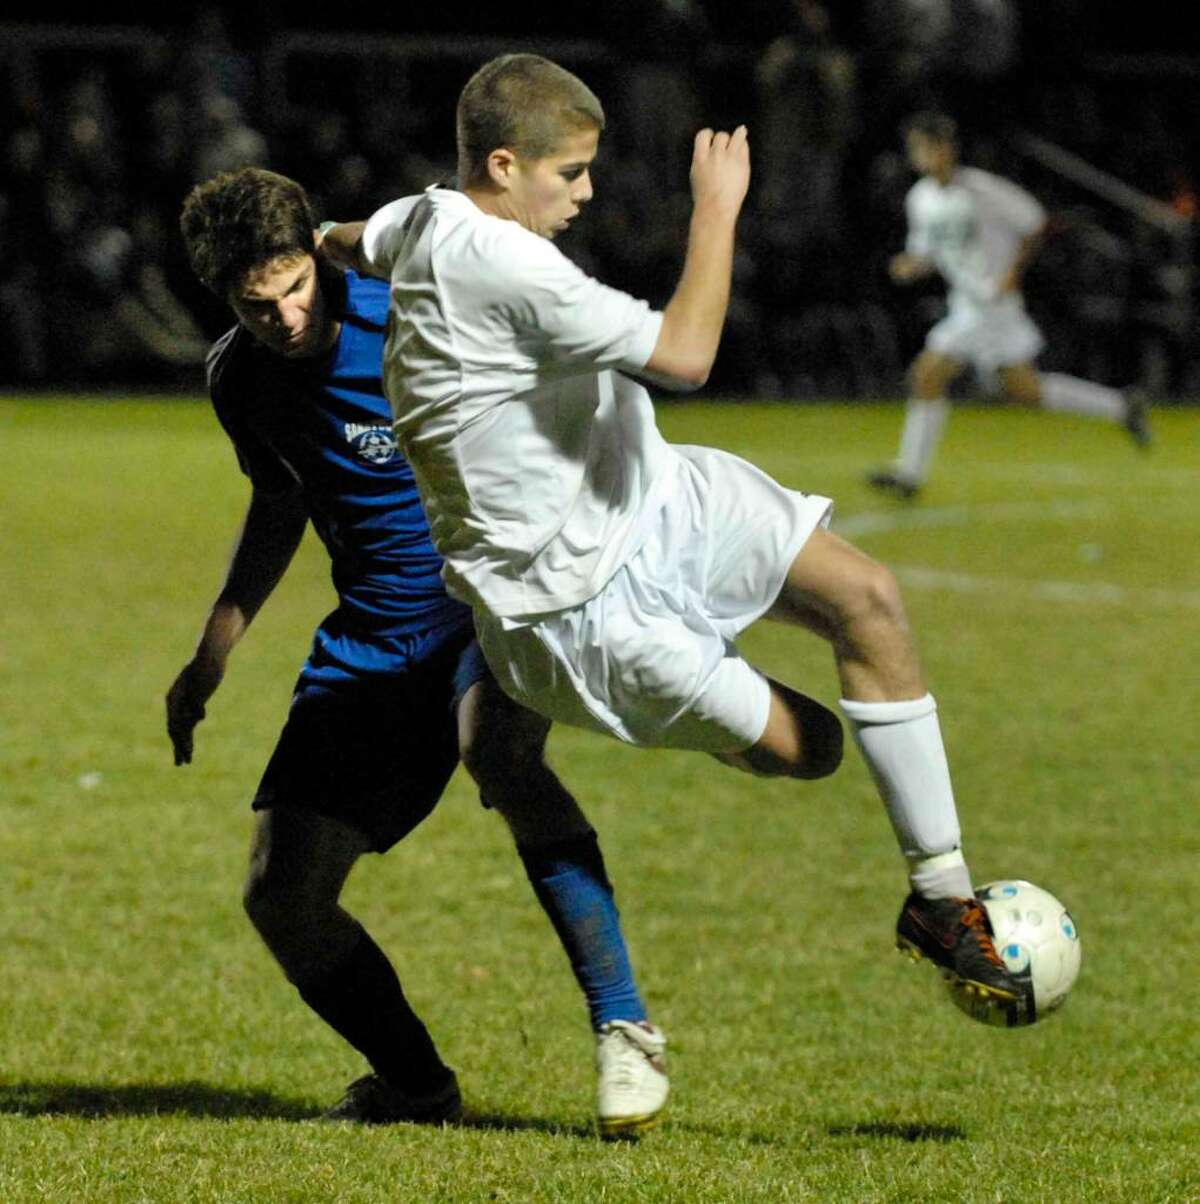 Shenendehowa's David Clemens, right, and Saratoga's Will Johns battle for the ball during their Section 2 Class AA Boys Soccer Championship game. Shenendehowa won 2-0. (Michael P. Farrell/Times Union)